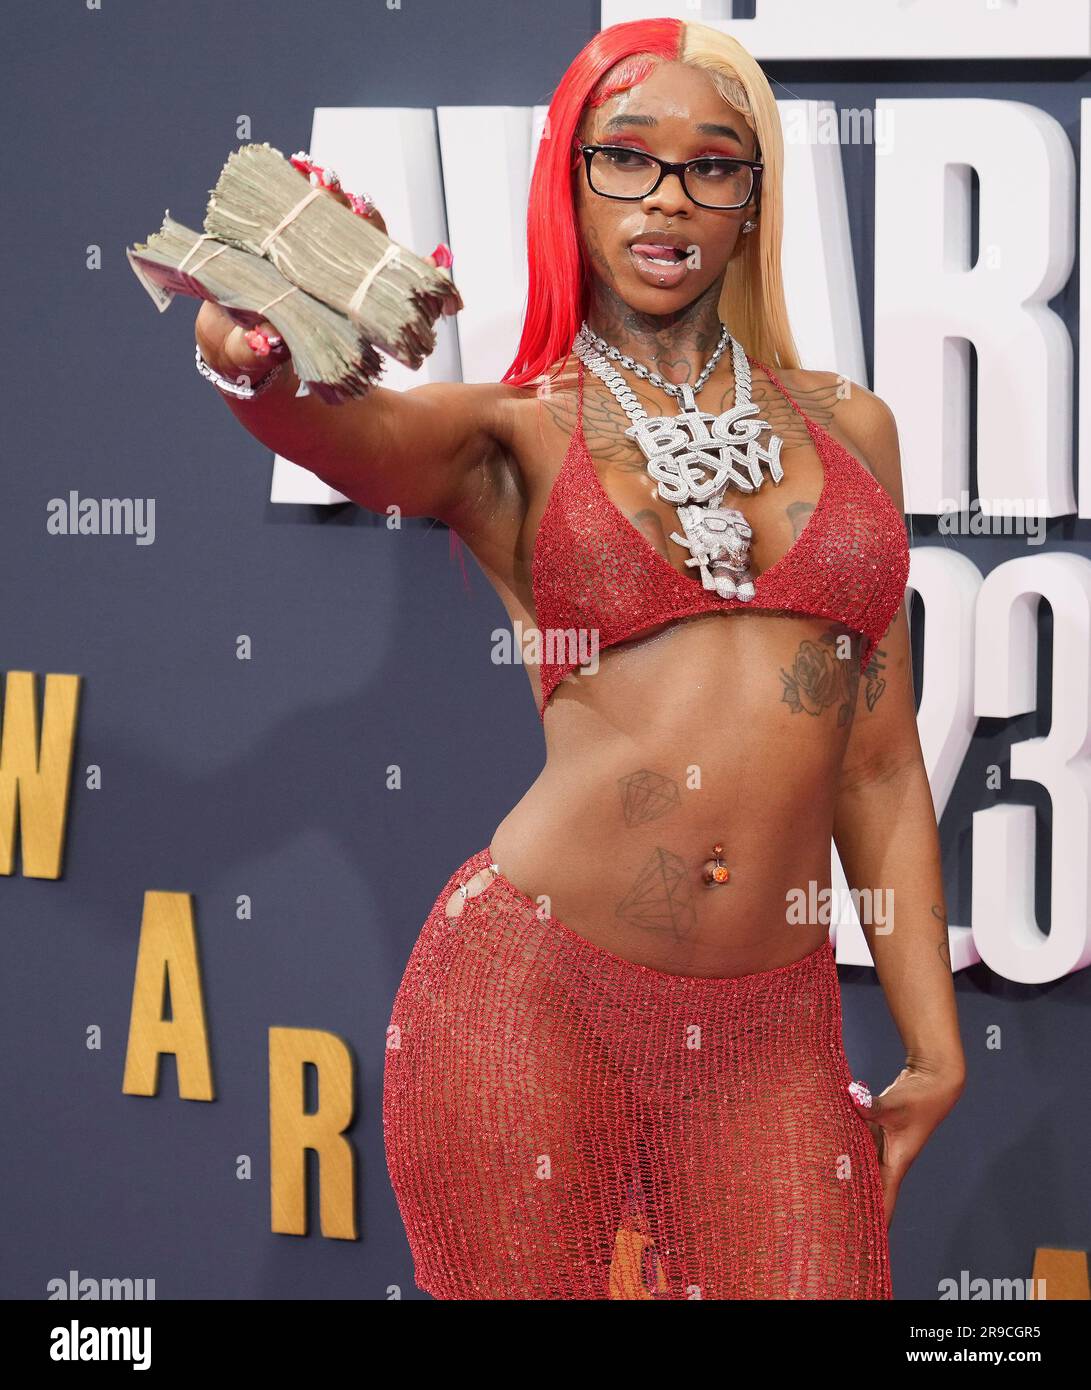 Los Angeles Usa 25th June 2023 Sexyy Red Arrives At The 2023 Bet Awards Held At The 